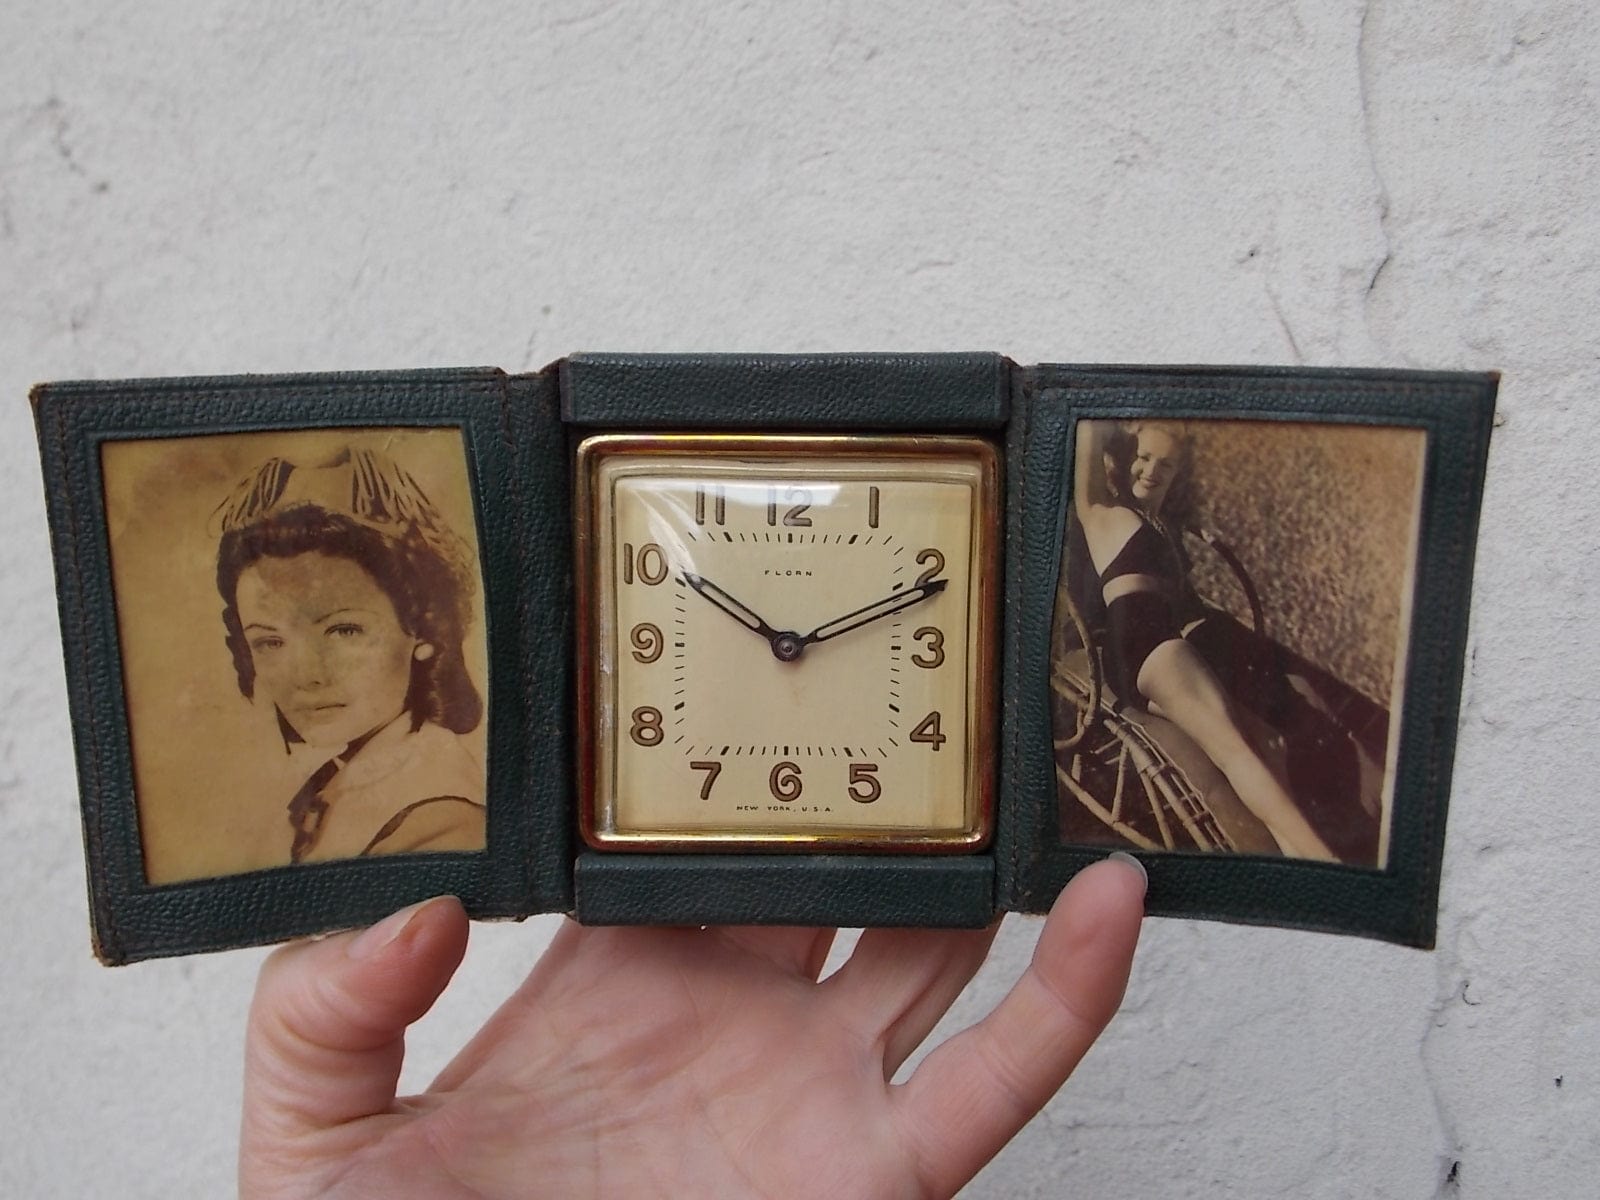 I Like Mike's Mid Century Modern Clock Florn Wind-Up Travel Clock from 1940's with Gene Tierney & Betty Grable